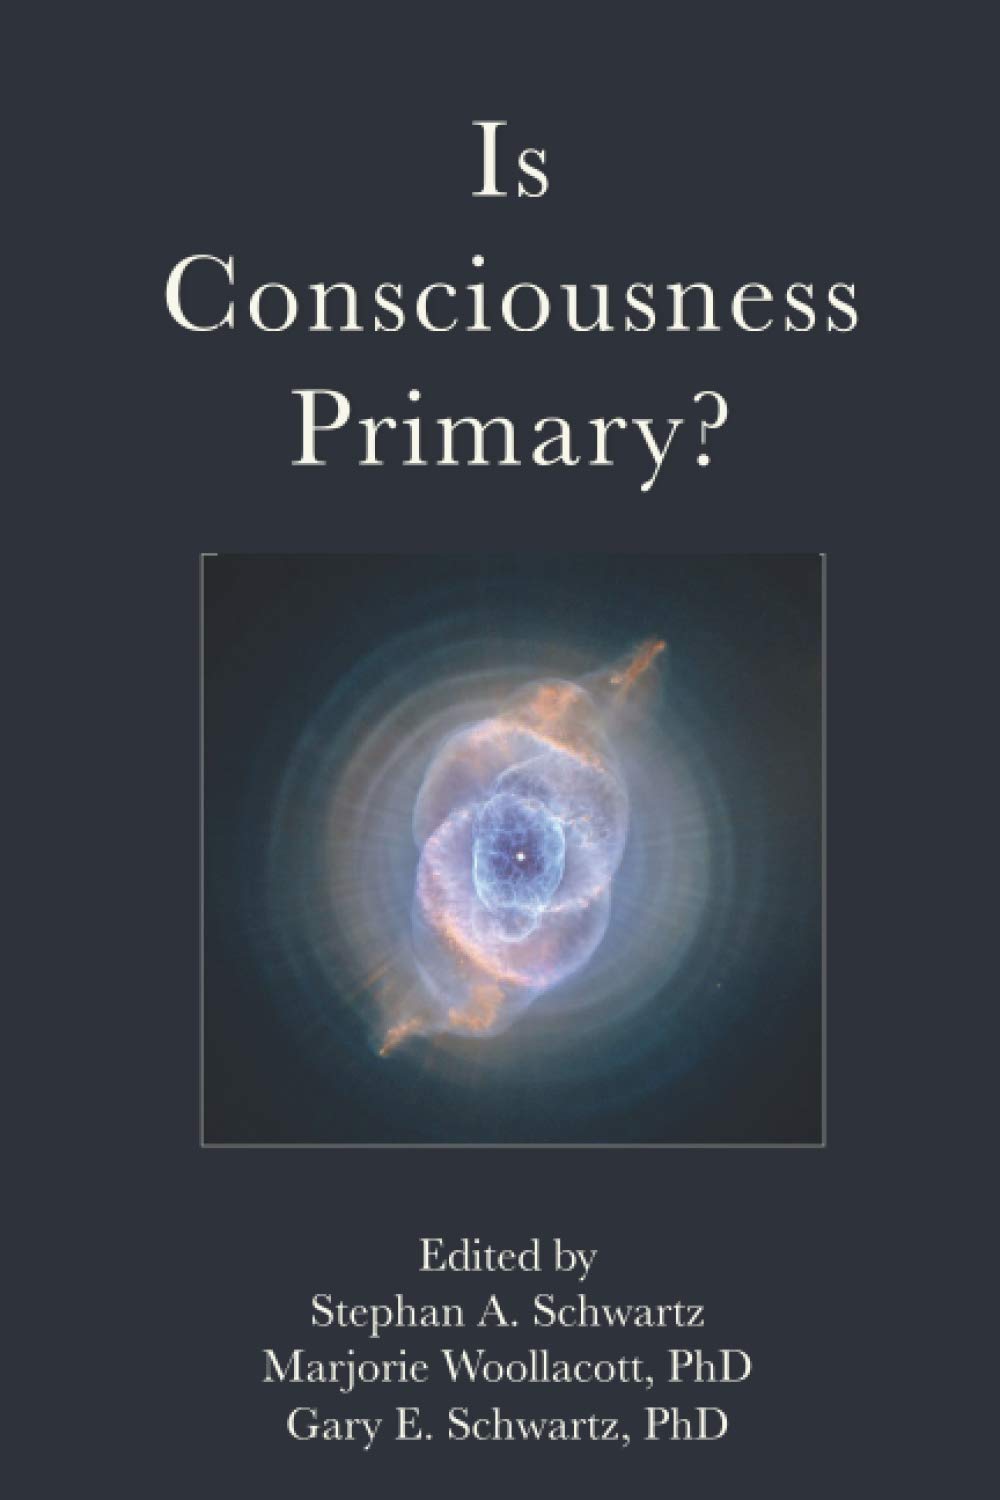 Book cover of "Is Consciousness Primary?"